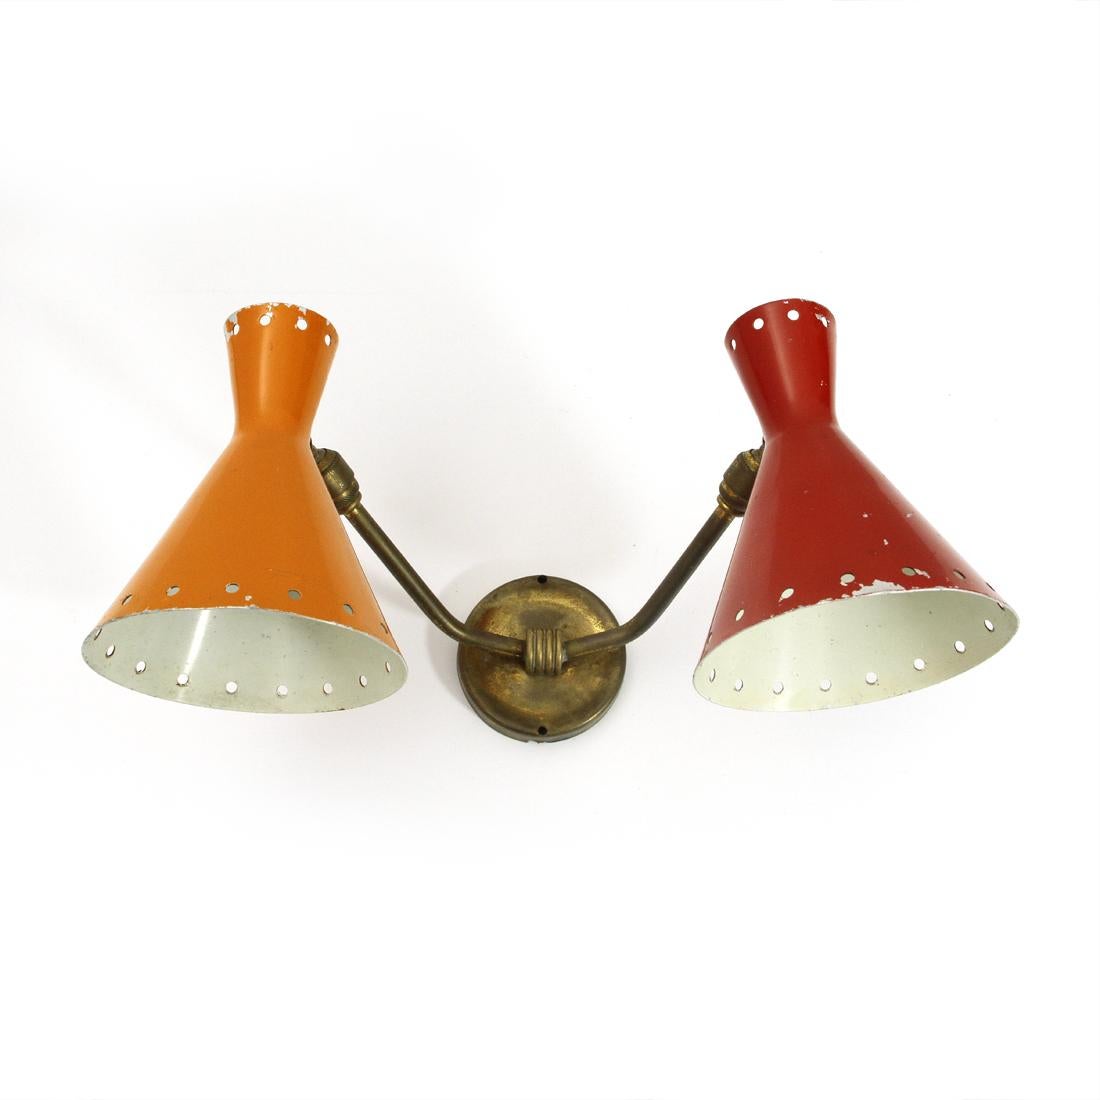 Wall lamp of Italian manufacture produced in the 1950s.
Wall plate and brass arms.
Diffusers in perforated aluminium and colored in orange and red and white inside.
Discrete general conditions, some lack of paint.

Dimensions: Height 14 cm,